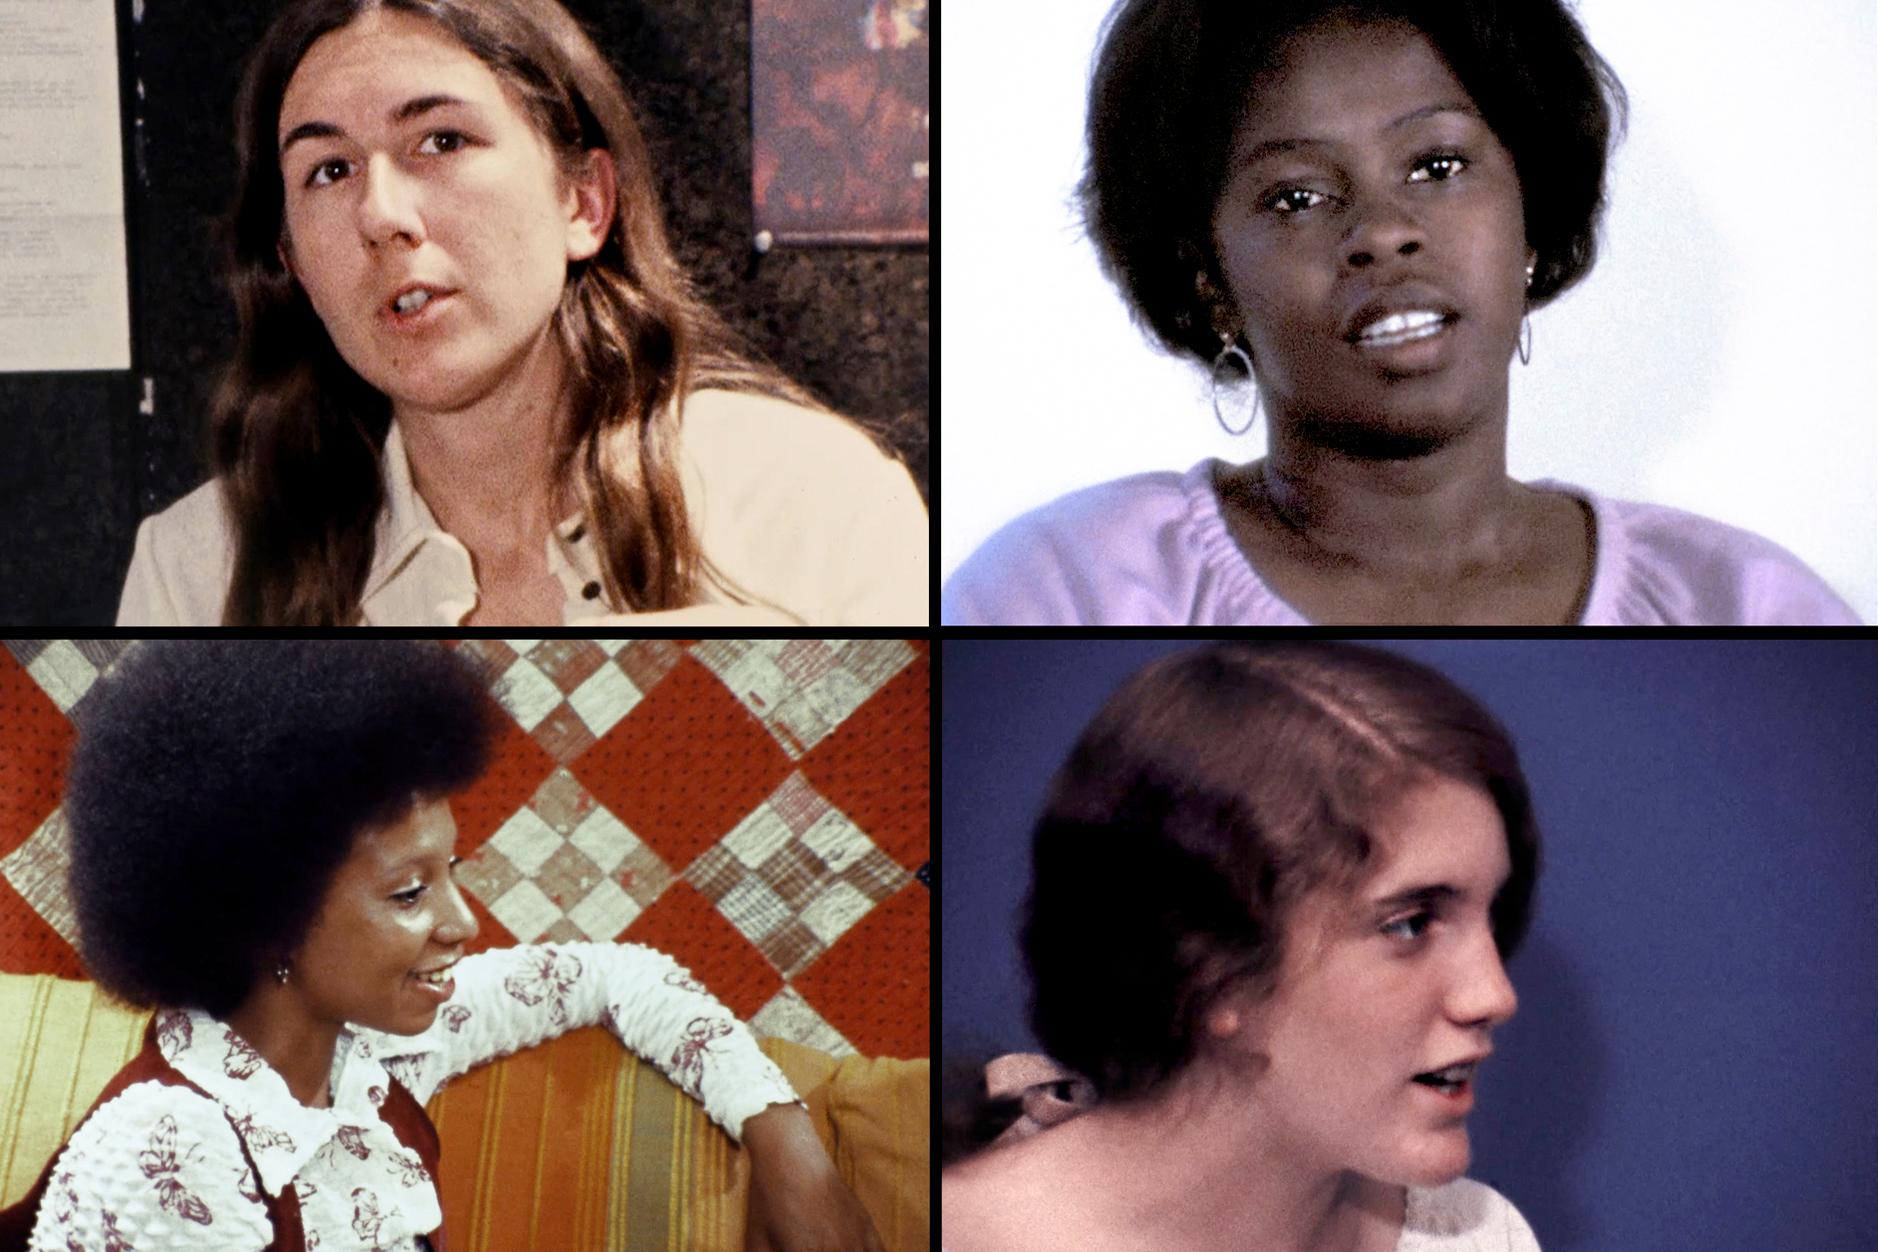 Photographs of four women in a grid. Two white, and two black. All are in the film discussing their experiences.